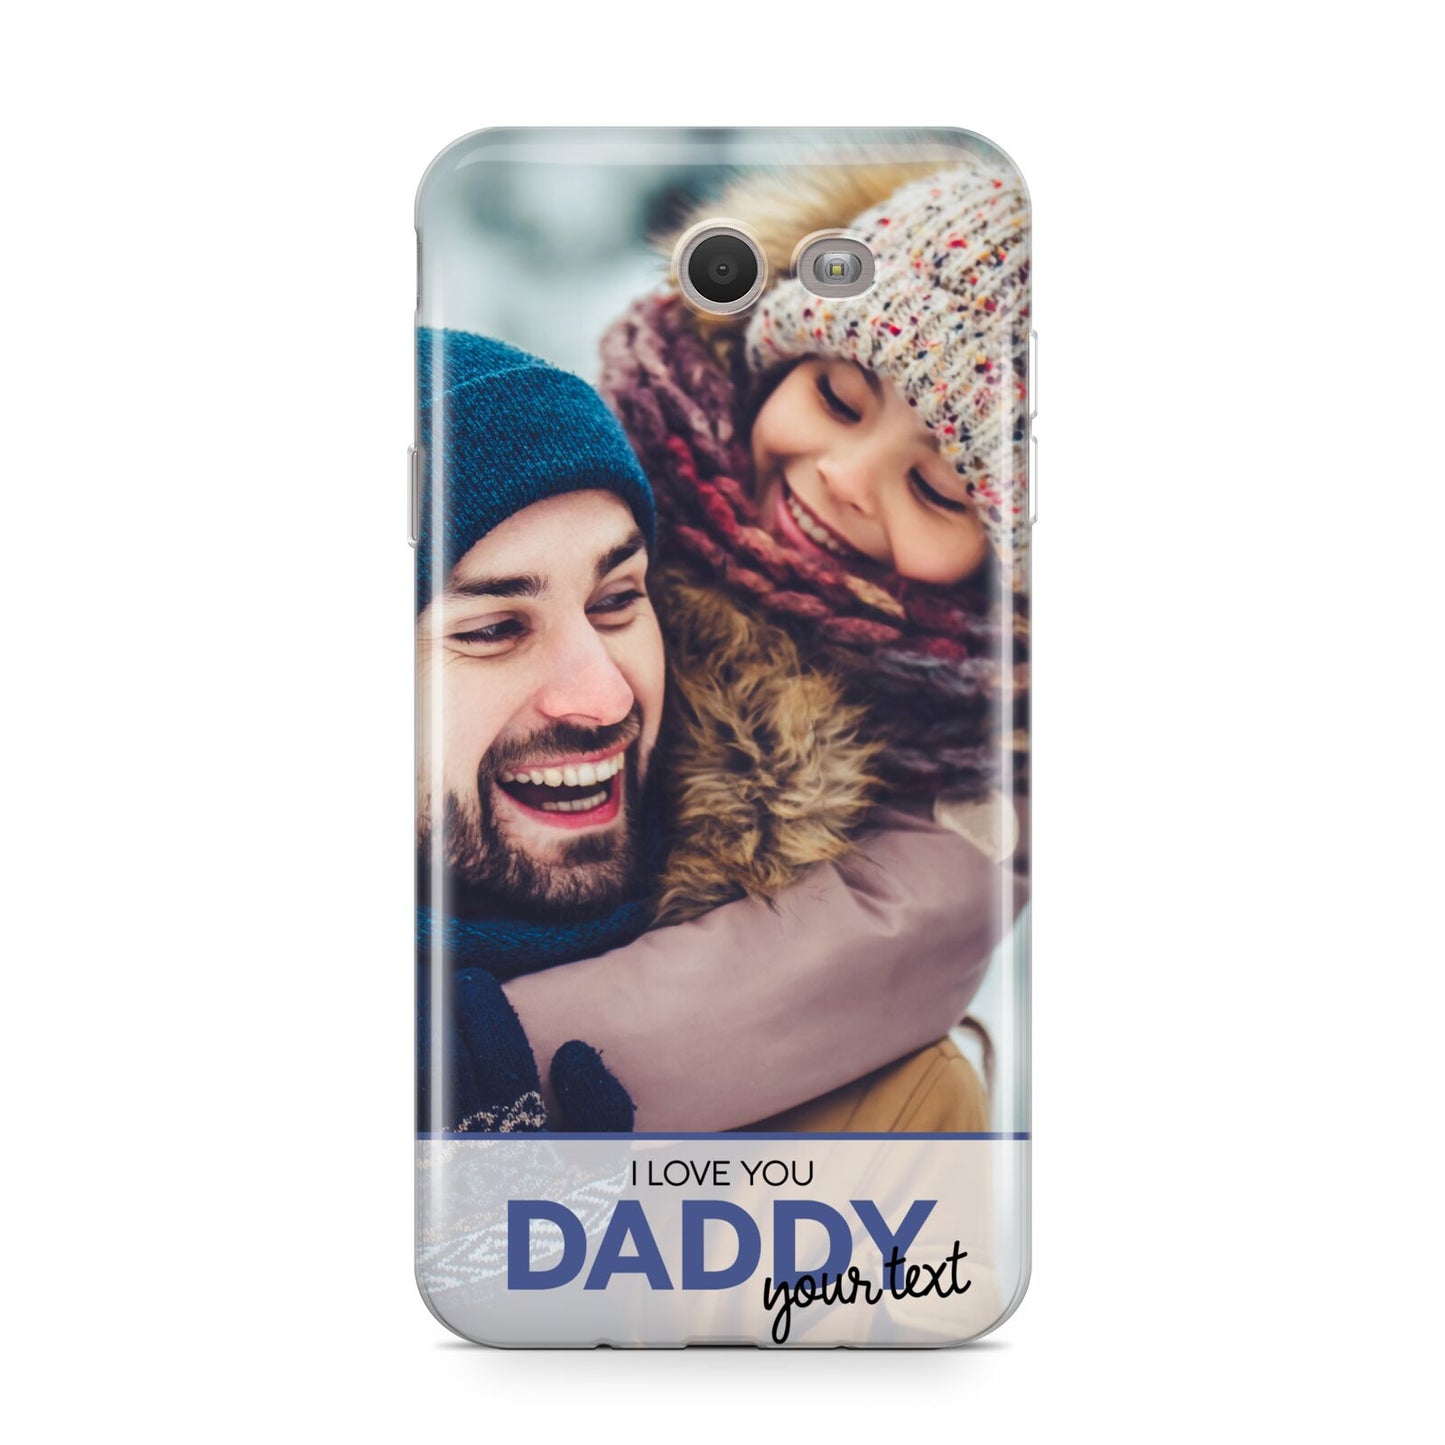 I Love You Daddy Personalised Photo Upload and Name Samsung Galaxy J7 2017 Case